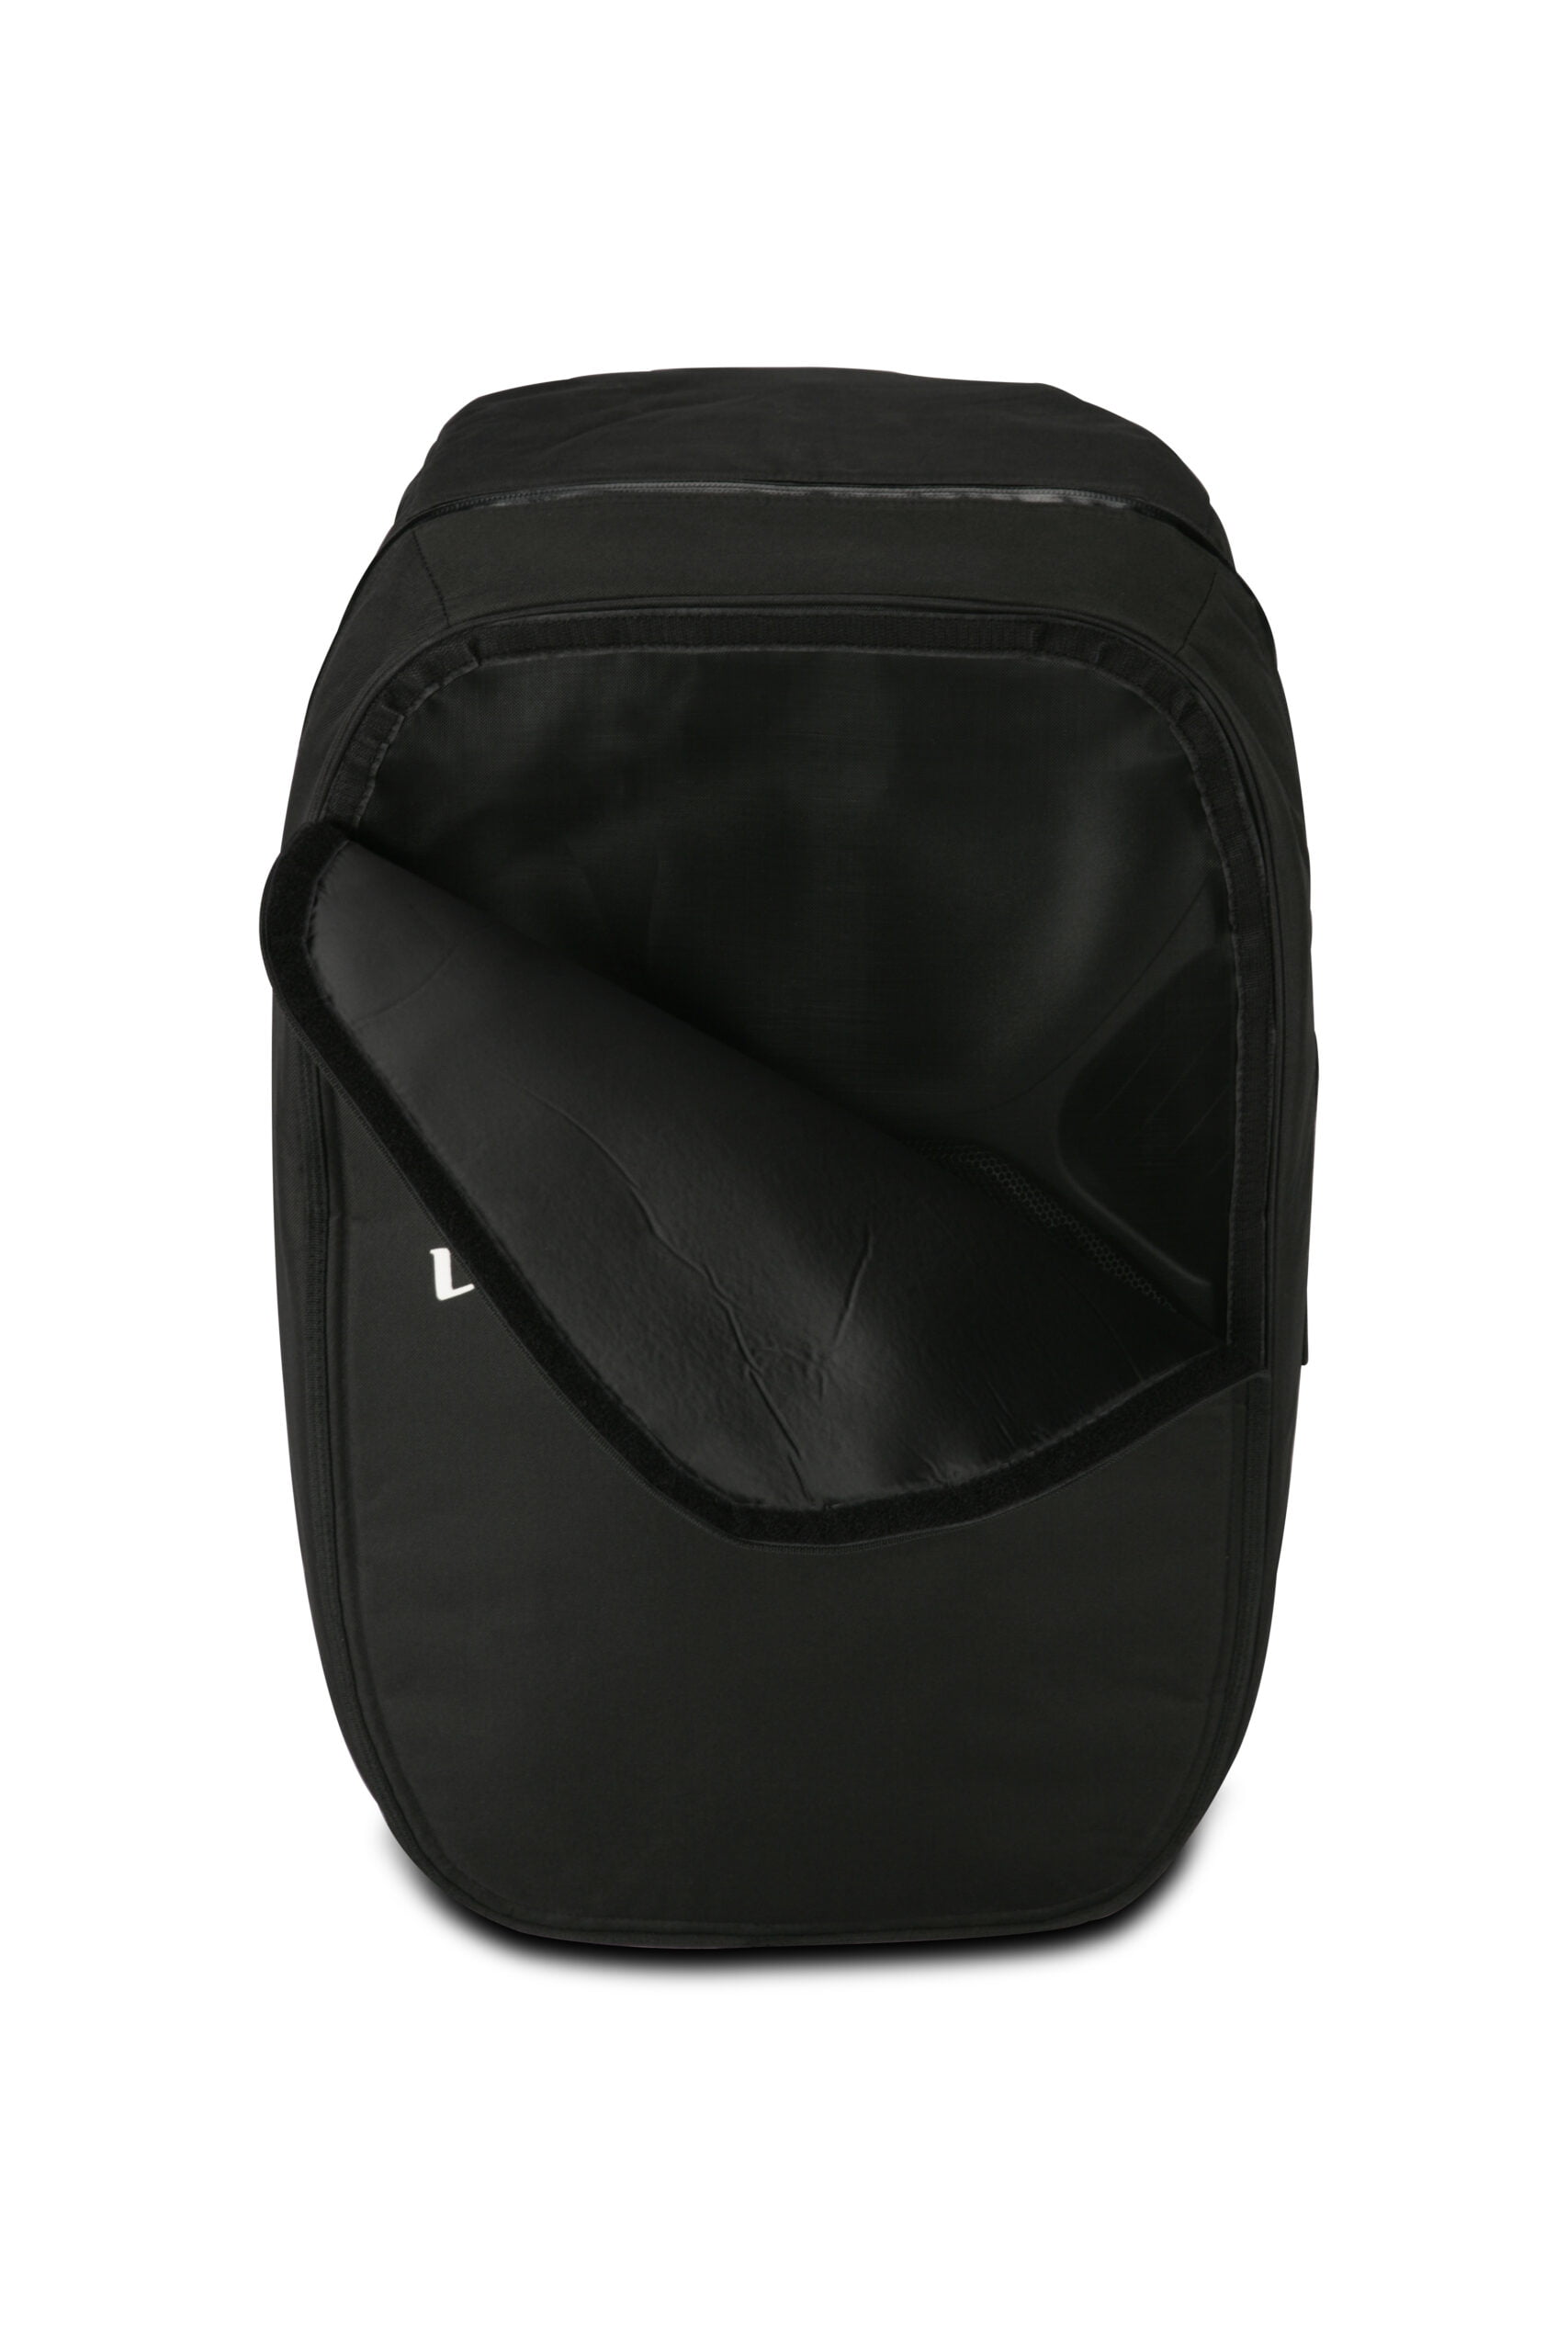 Wharfedale Pro TITAN 8 BAG at Bounce Online R725.00